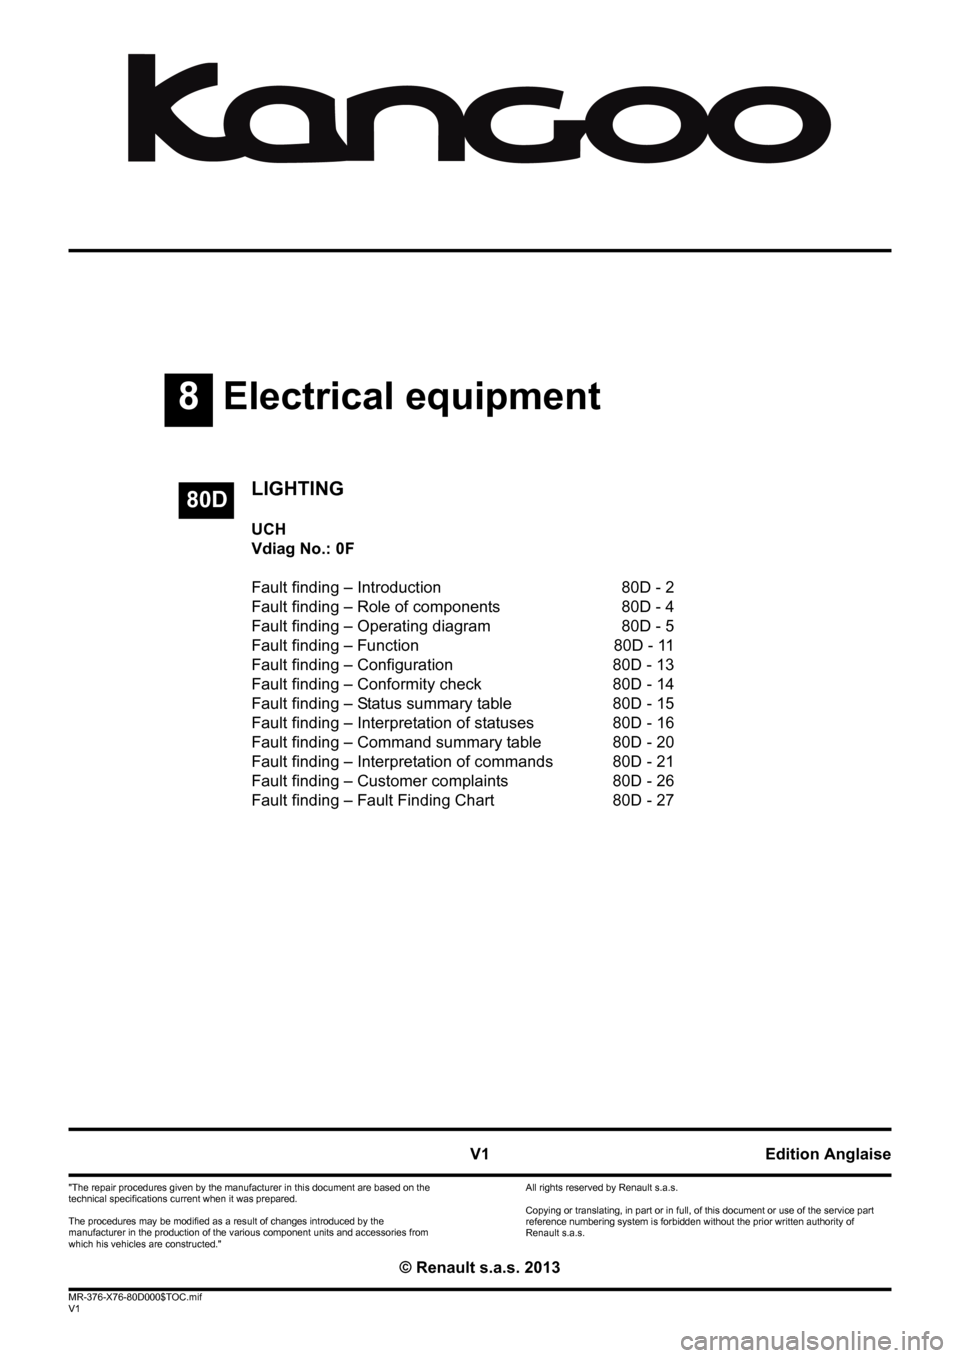 RENAULT KANGOO 2013 X61 / 2.G Lighting Workshop Manual 8Electrical equipment
V1 MR-376-X76-80D000$TOC.mif
V1
80D
"The repair procedures given by the manufacturer in this document are based on the 
technical specifications current when it was prepared.
The